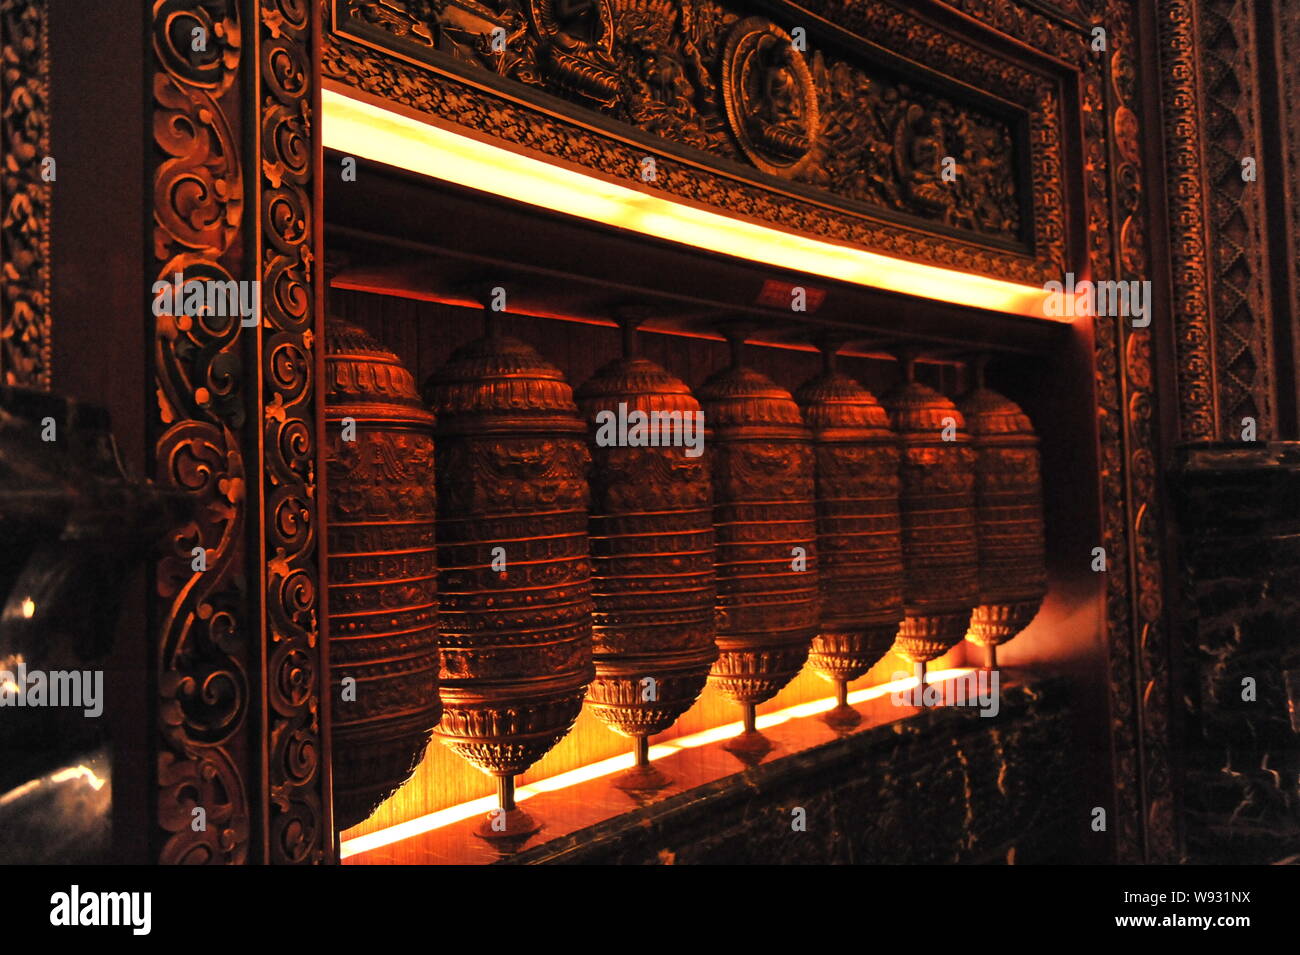 A line of prayer wheels with elaborate carvings on them is seen in Wu Yin Tan Cheng in Wuxi city, east Chinas Jiangsu province, 3 August 2013.   Locat Stock Photo